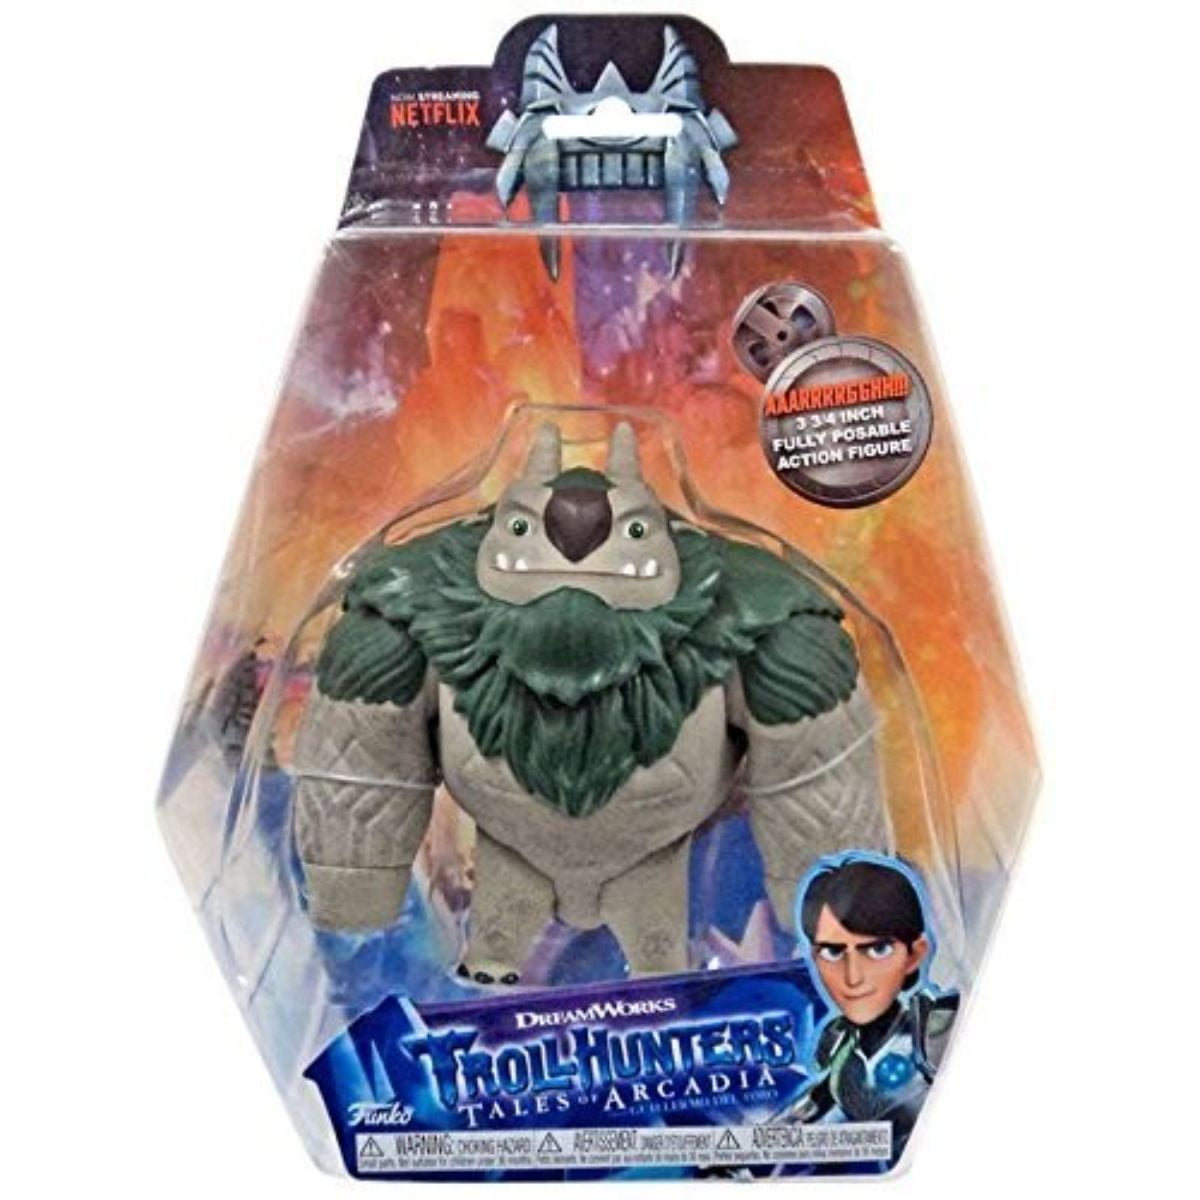 Funko Trollhunters Tales of Arcadia Blinkous Galadrigal Action Figure for sale online 